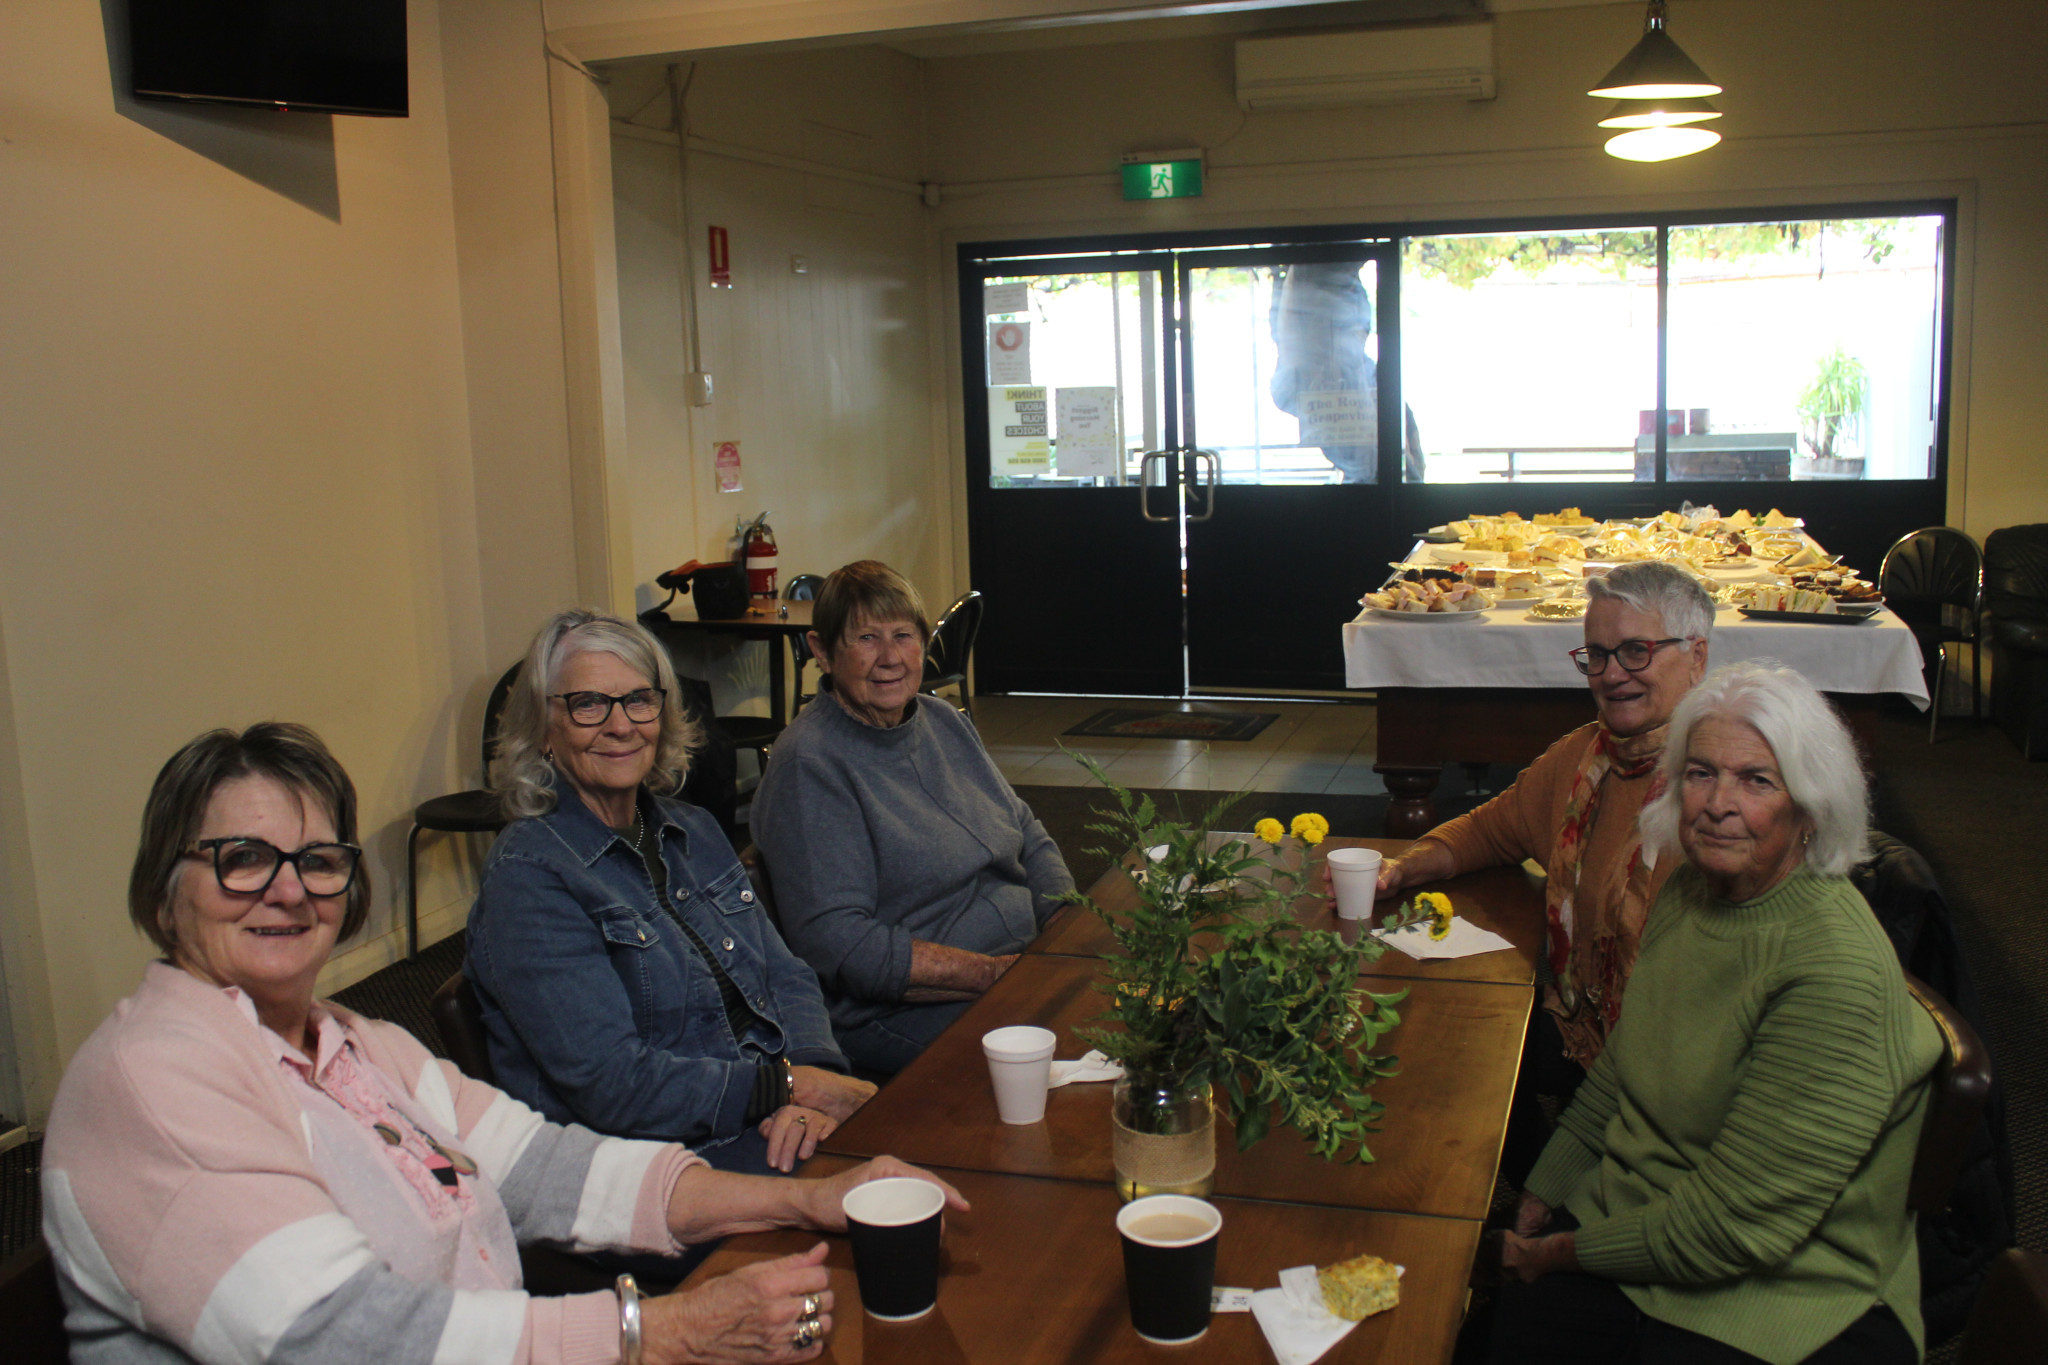 Plates and platters were warmly received by attendees at Peggy’s Biggest Morning Tea. Food was generous-ly provided by Peggy and other cooking eager guests. There was hardly any room left on the table!